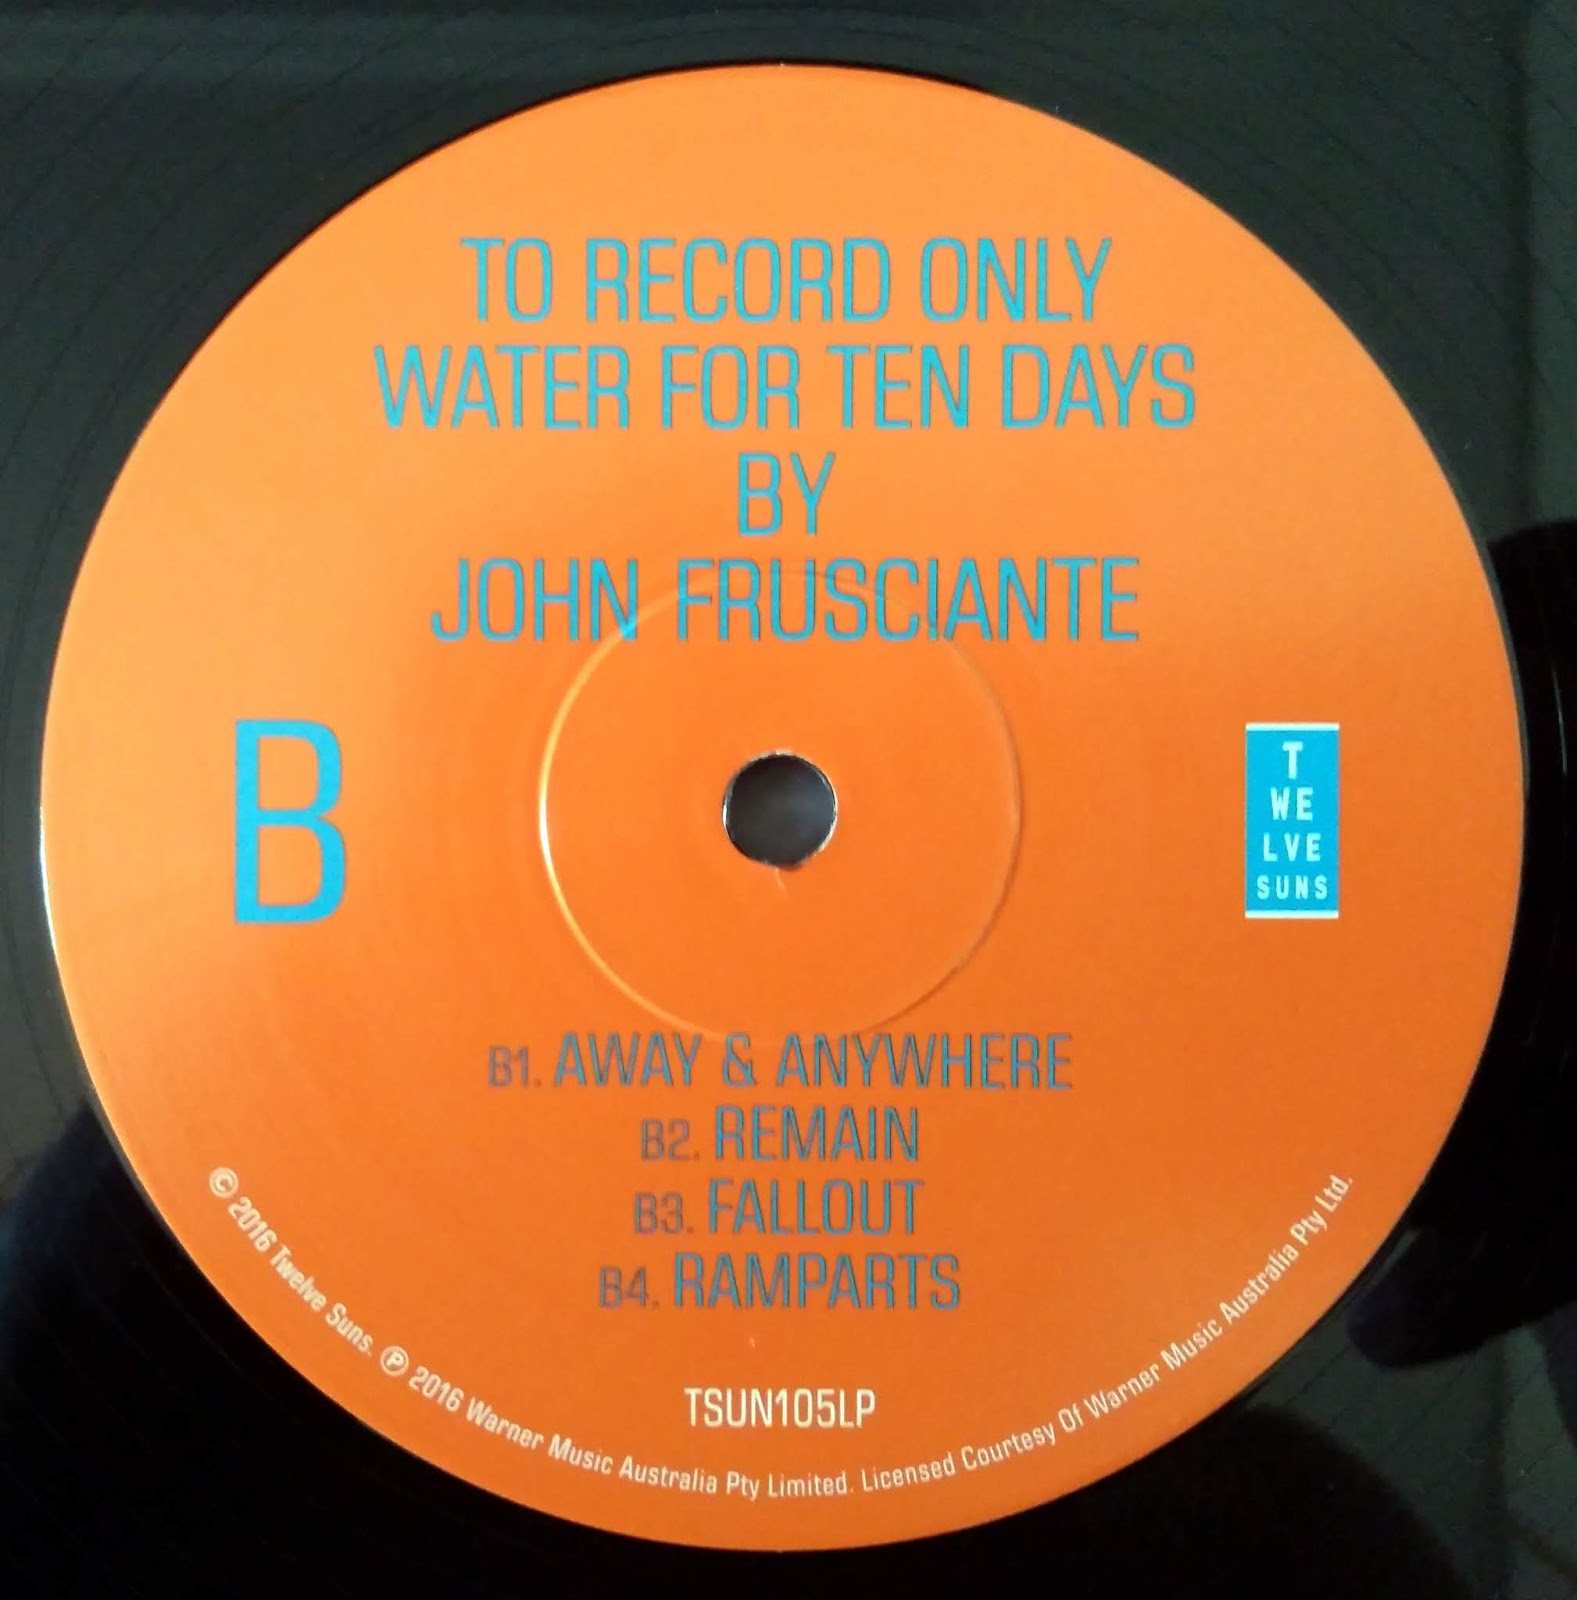 John Frusciante effects: Frusciante Collection 31: To Record Only